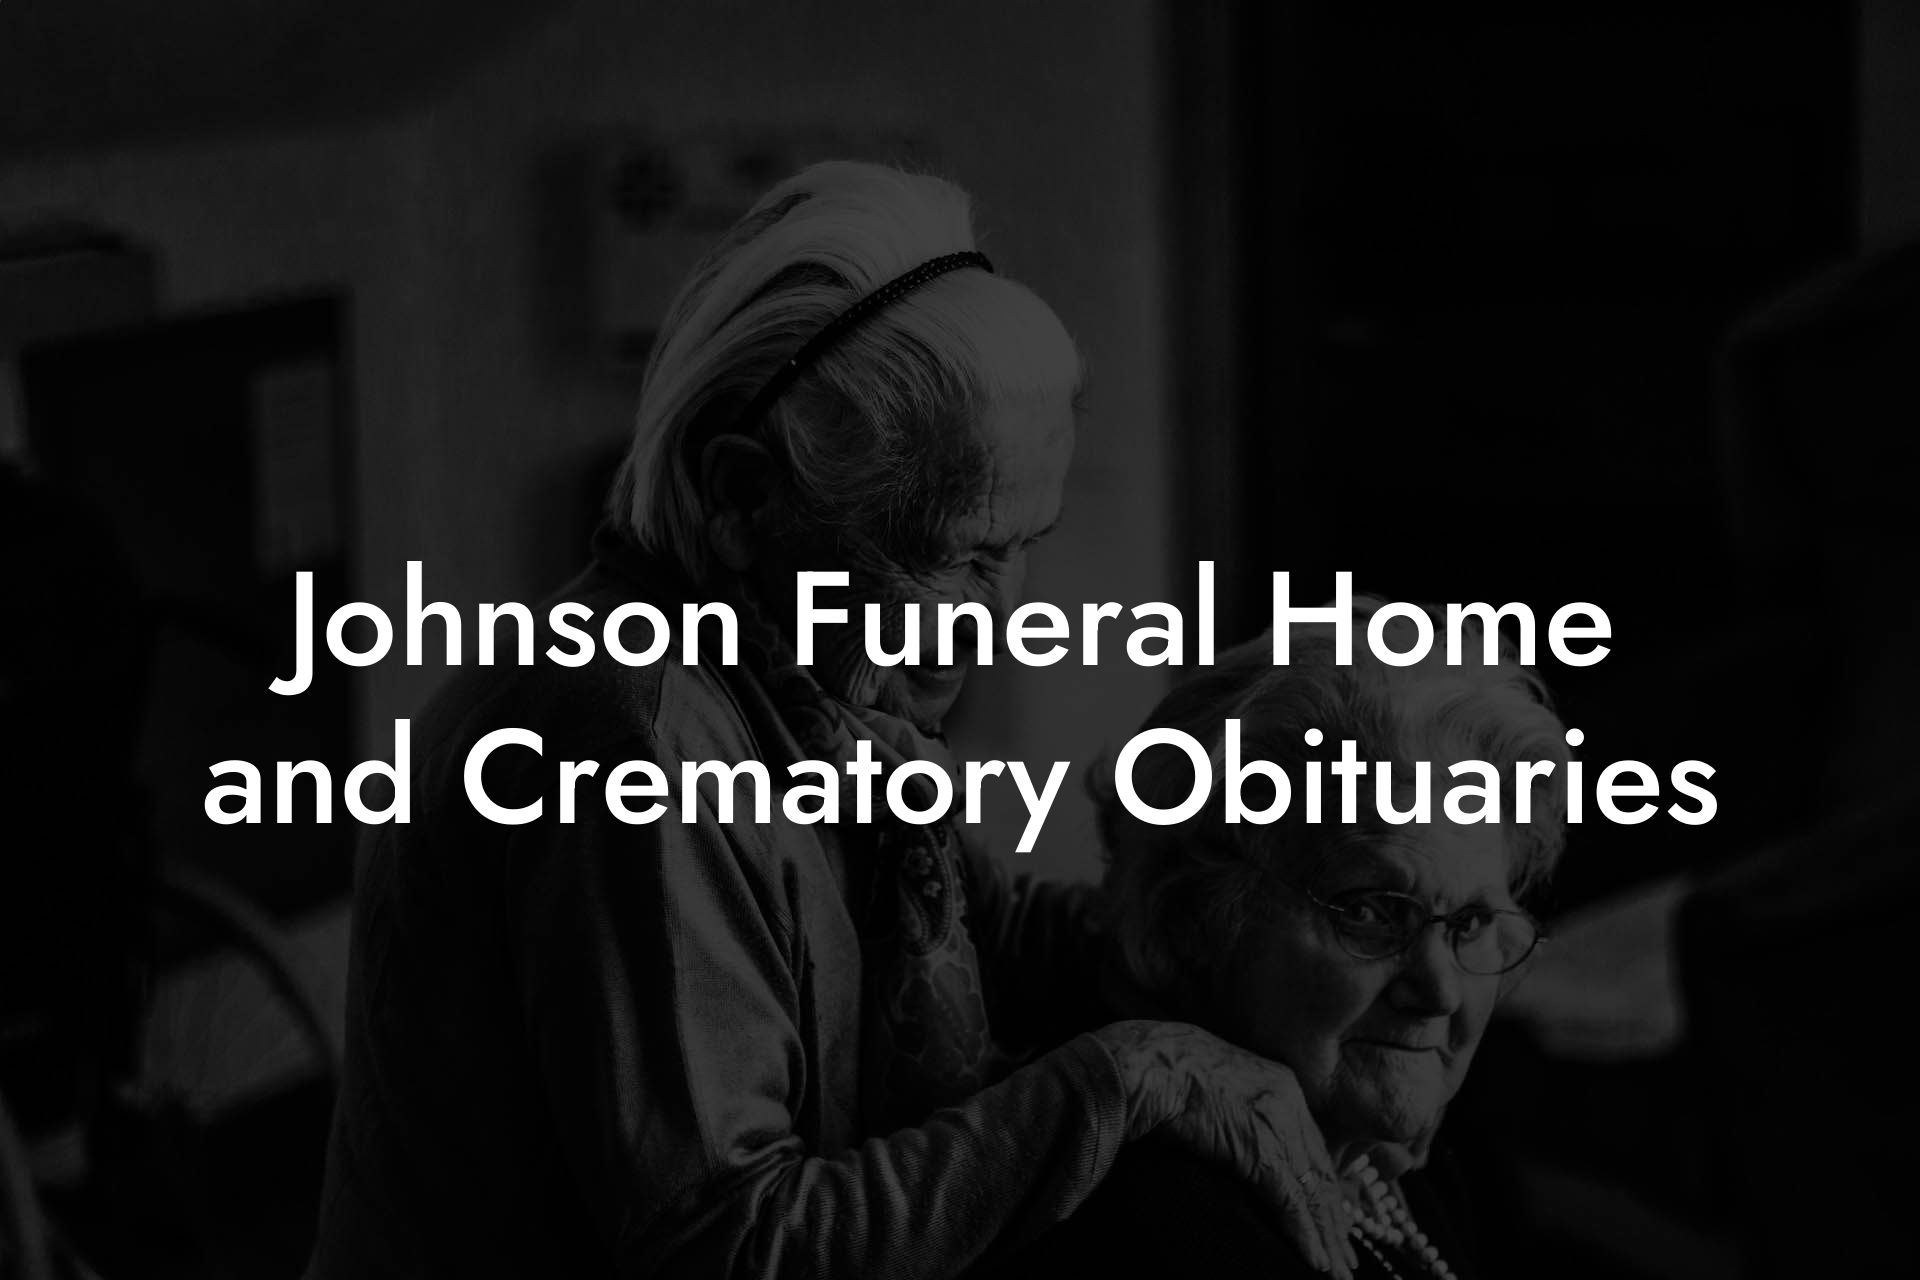 Johnson Funeral Home and Crematory Obituaries